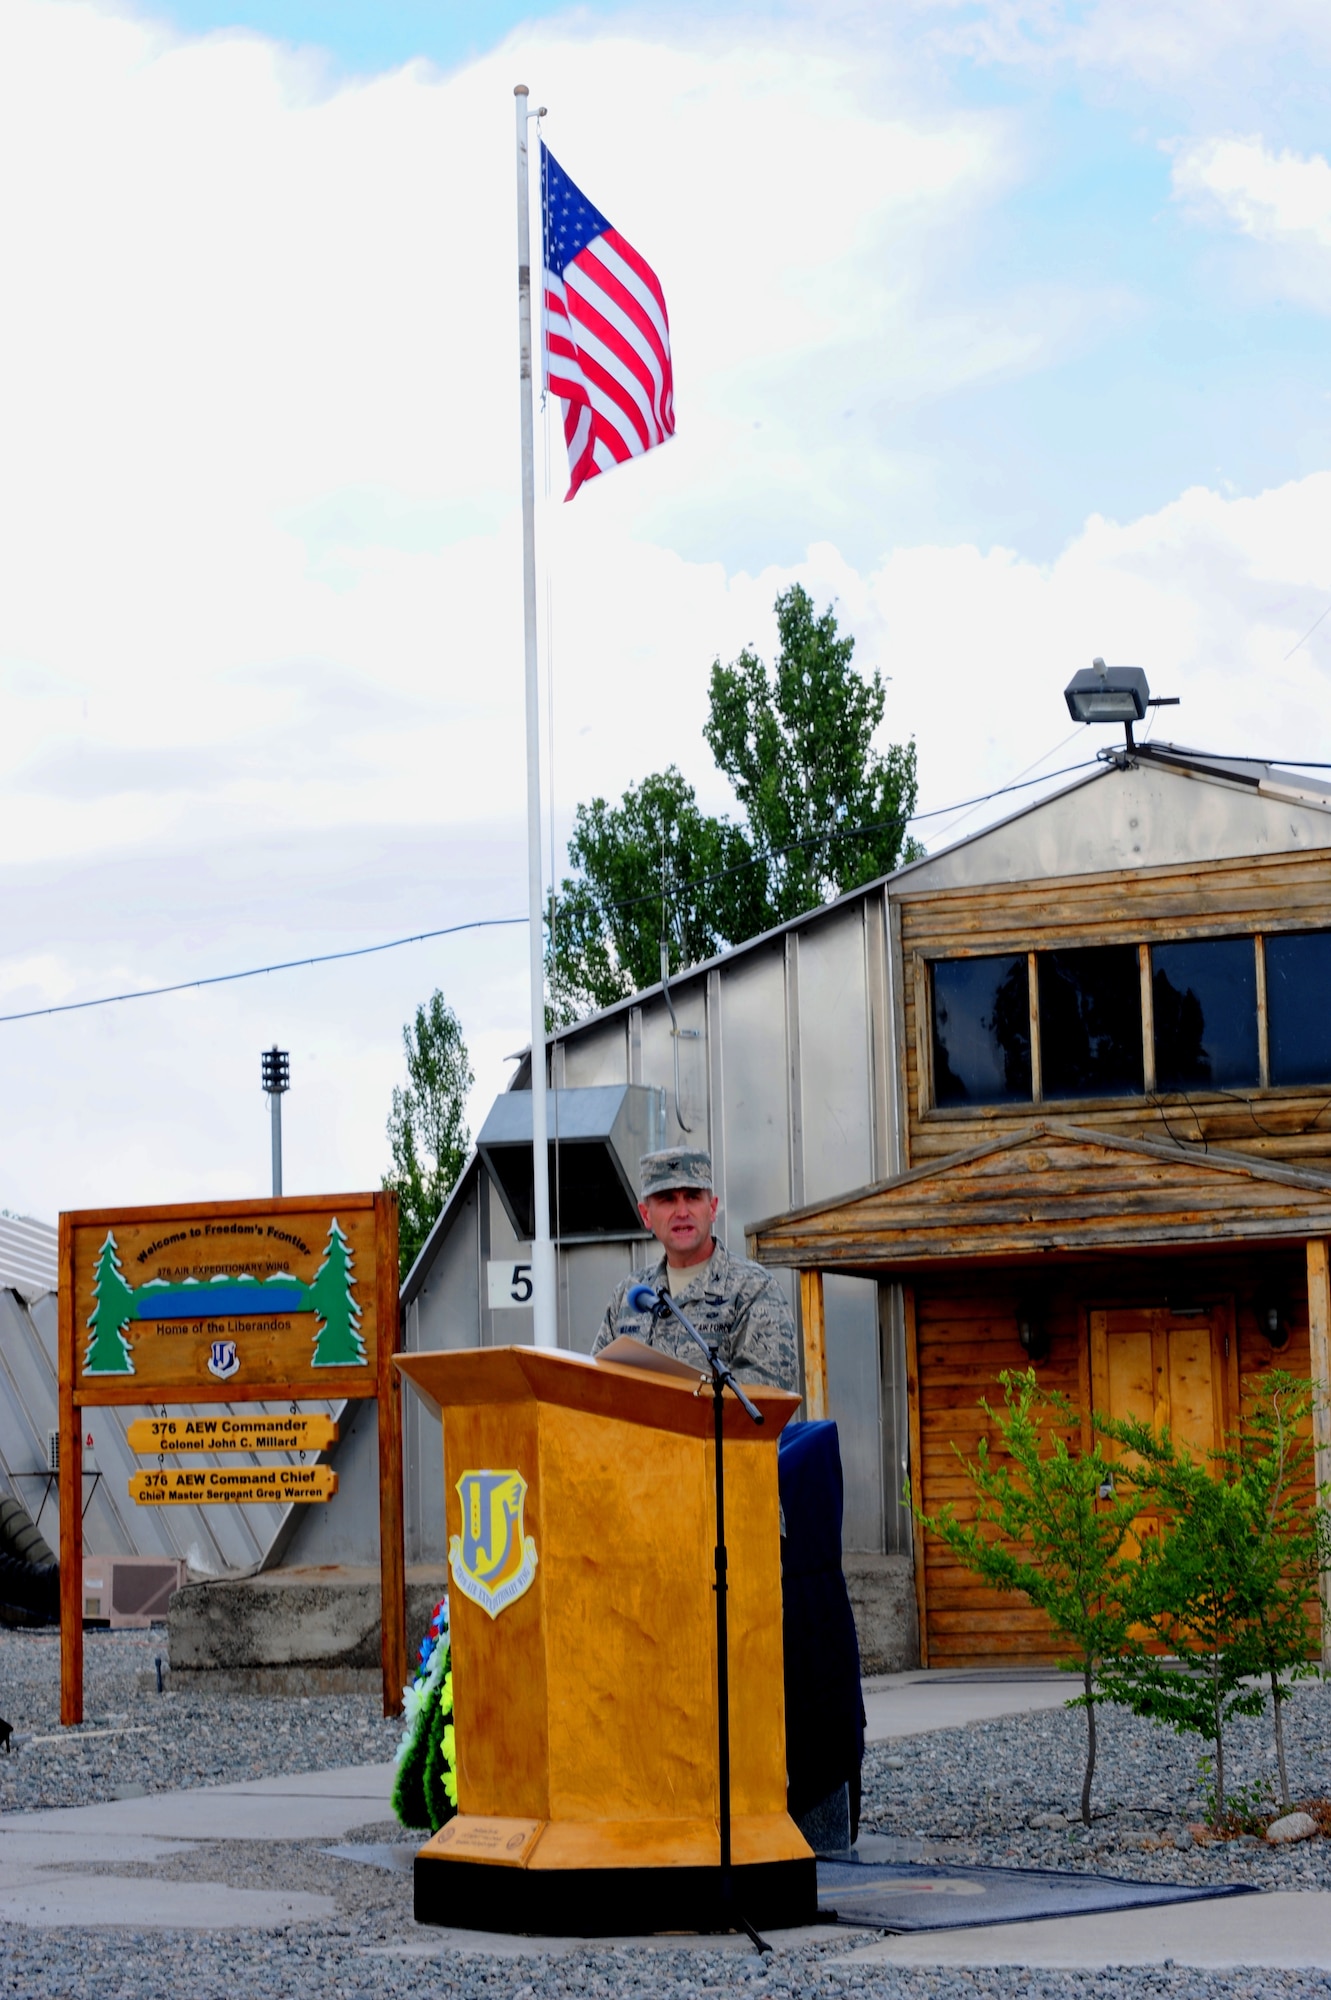 Col. John Millard speaks during the 376th Air Expeditionary Wing's inactivation ceremony June 3, 2014, at Transit Center at Manas, Kyrgyzstan. At the height of operations, approximately 1,500 U.S. military personnel were assigned to the wing, along with approximately 900 U.S. and host-nation contractor personnel who provided daily support to various base missions. Millard is the commander of the 376th AEW. (U.S. Air Force photo/Lt. Col. Max Despain)